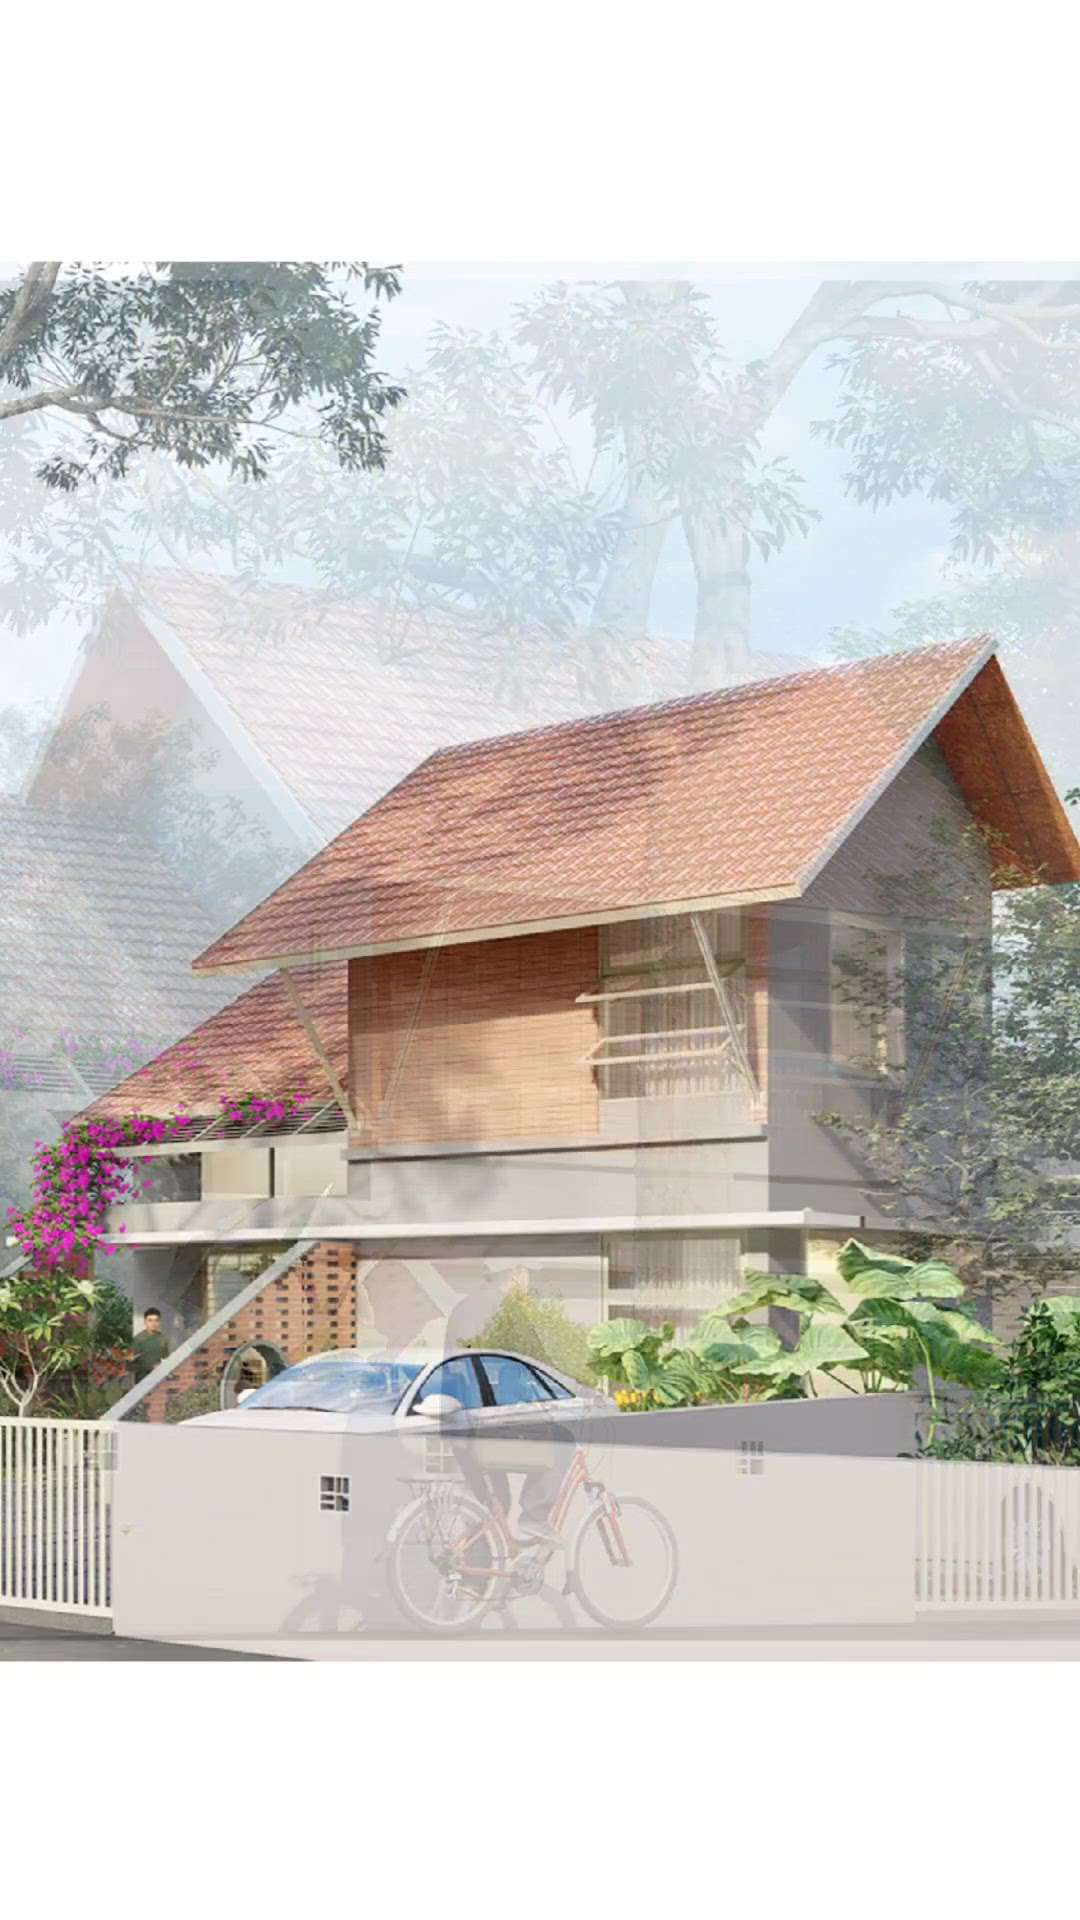 Aseer Residence Kodungallur
#Architect #architecturedesigns #tropicalhouse #TraditionalHouse #SlopingRoofHouse